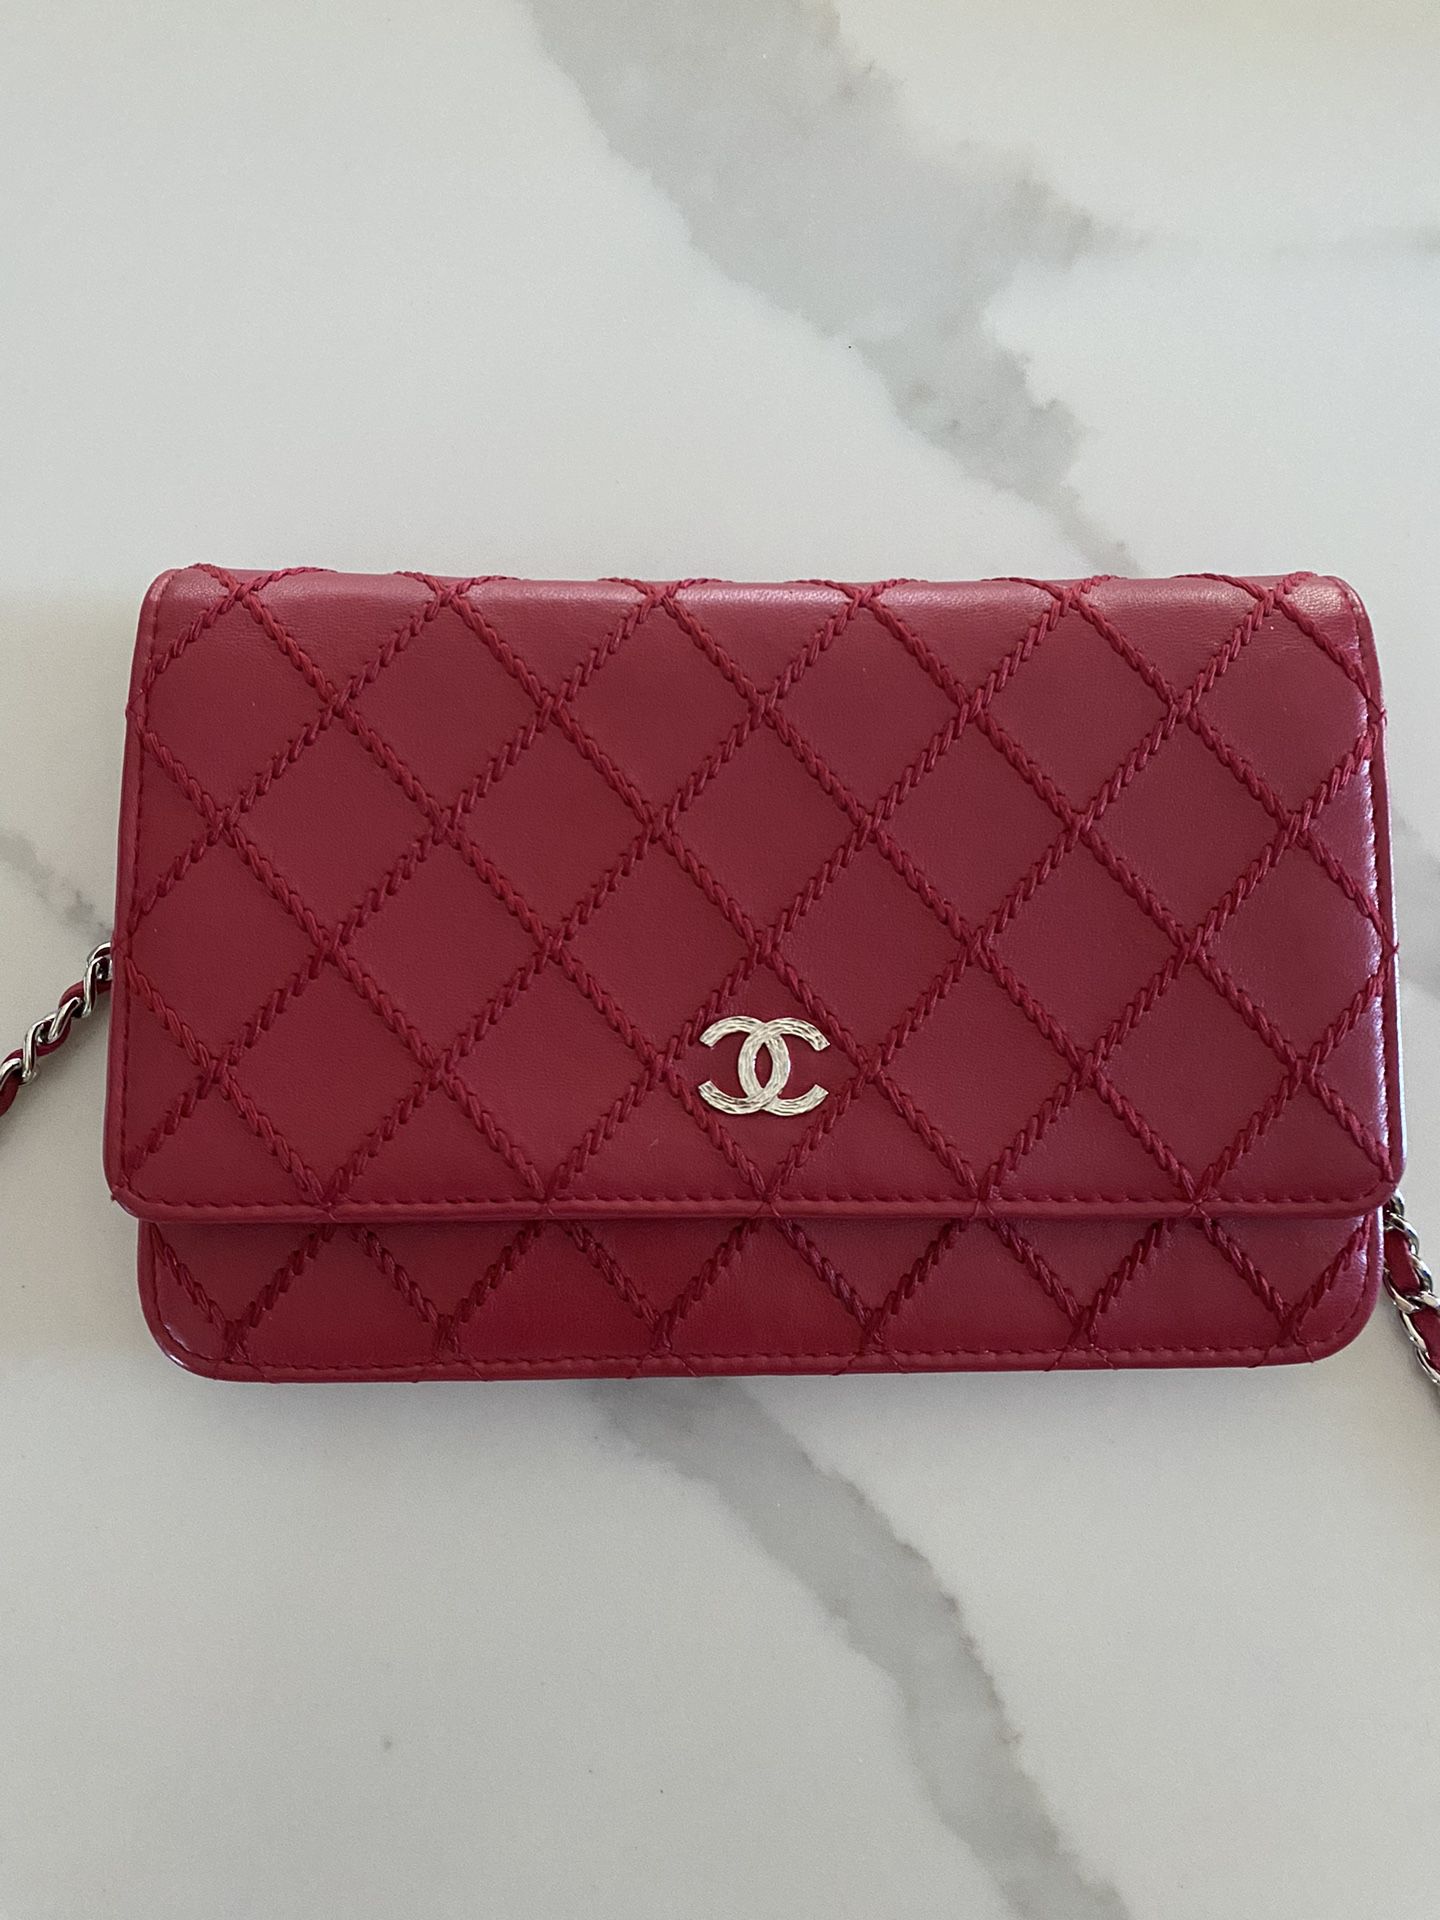 CHANEL, Bags, Stunning Authentic Chanel Pink Wallet